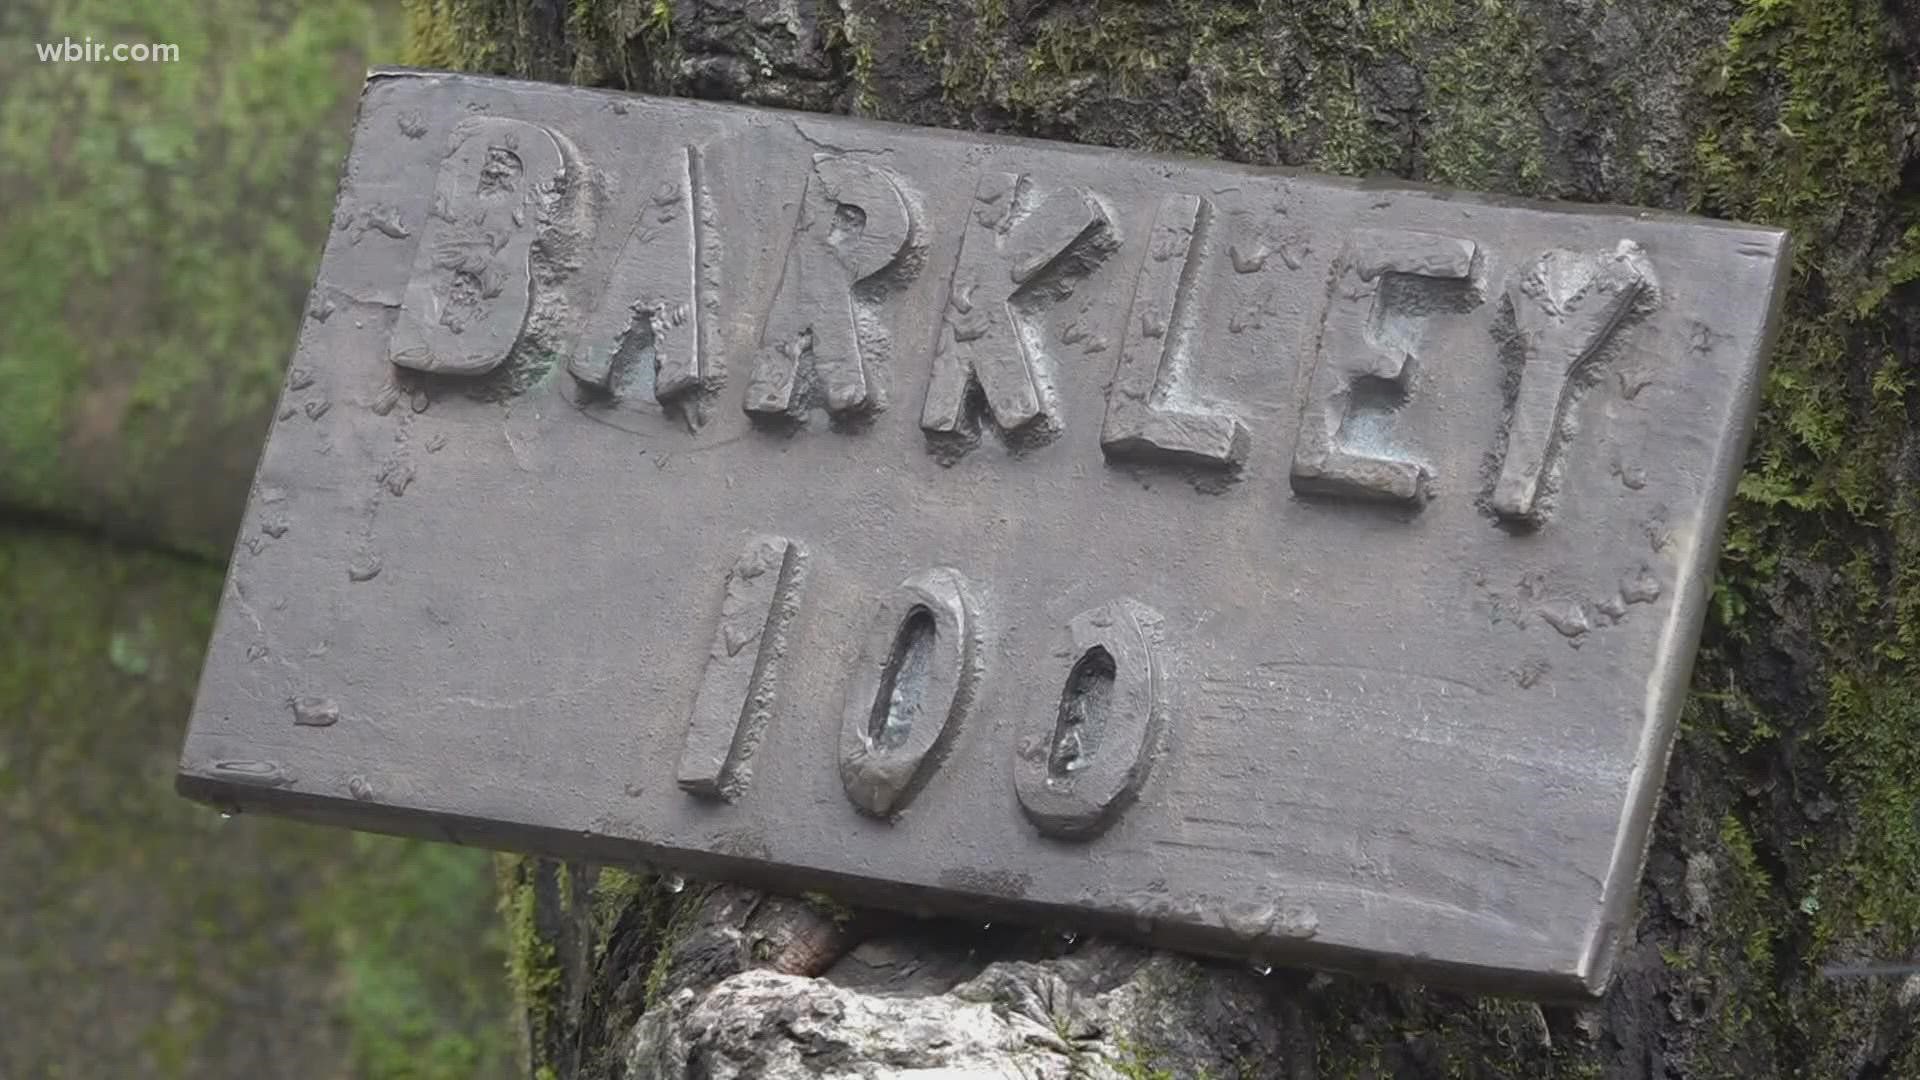 The world-famous Barkley Marathons span more than 100 miles through the mountains. Only around 15 people have finished the race in the past 35 years.